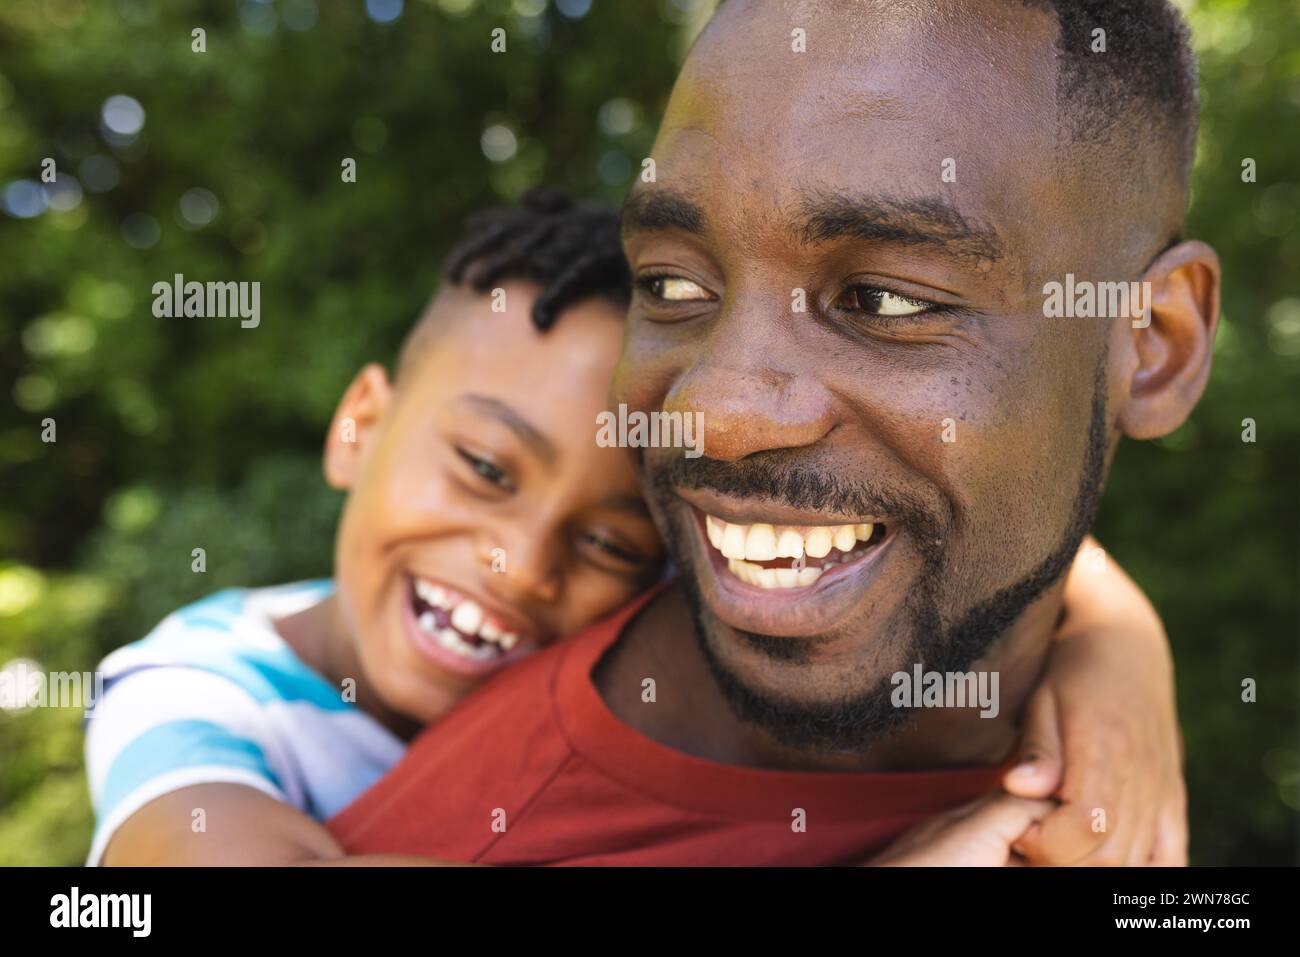 African American father and son share a joyful embrace outdoors Stock Photo